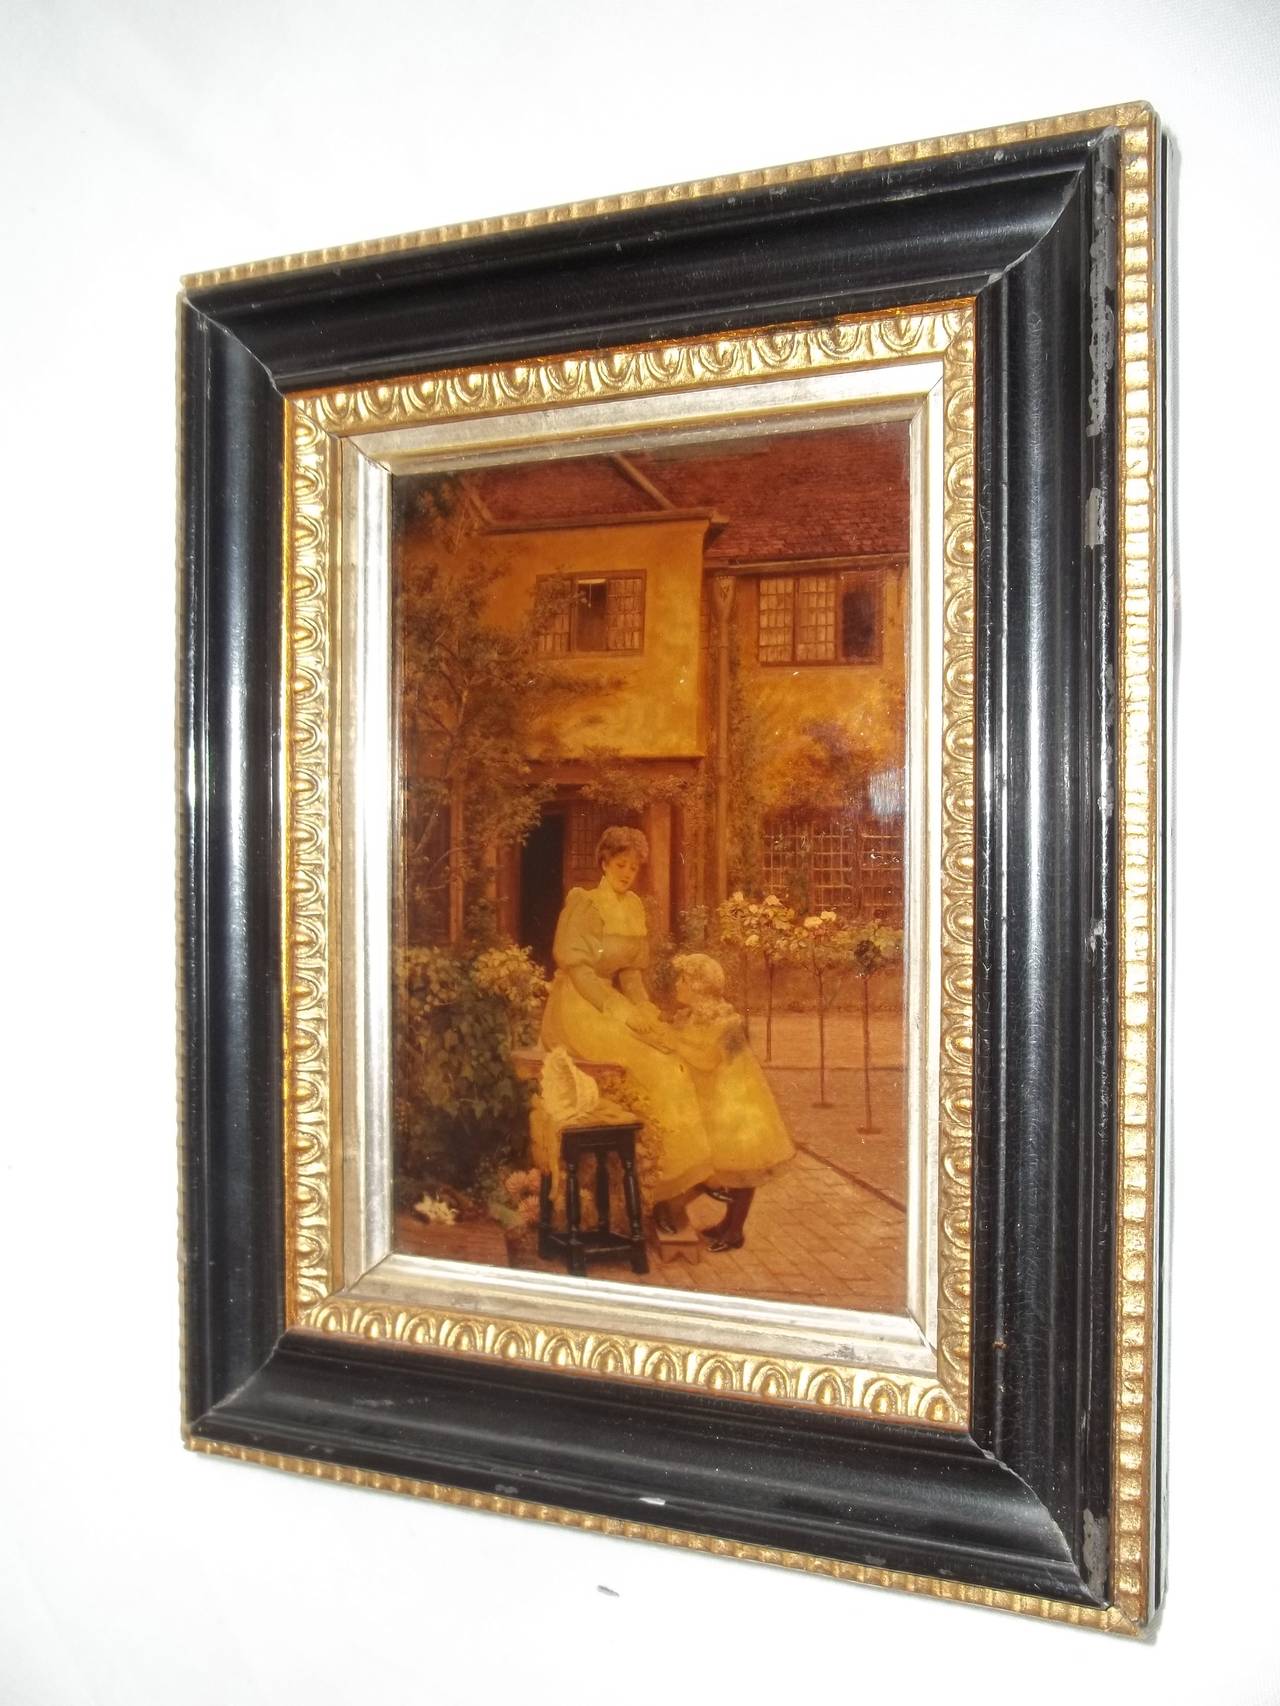 This is a good late Victorian Crystoleum picture, circa 1890.

The picture shows a woman and girl (mother and daughter) in the pathway of an old house. The glass is concave. The frame is of the same period, probably original, with some slight wear